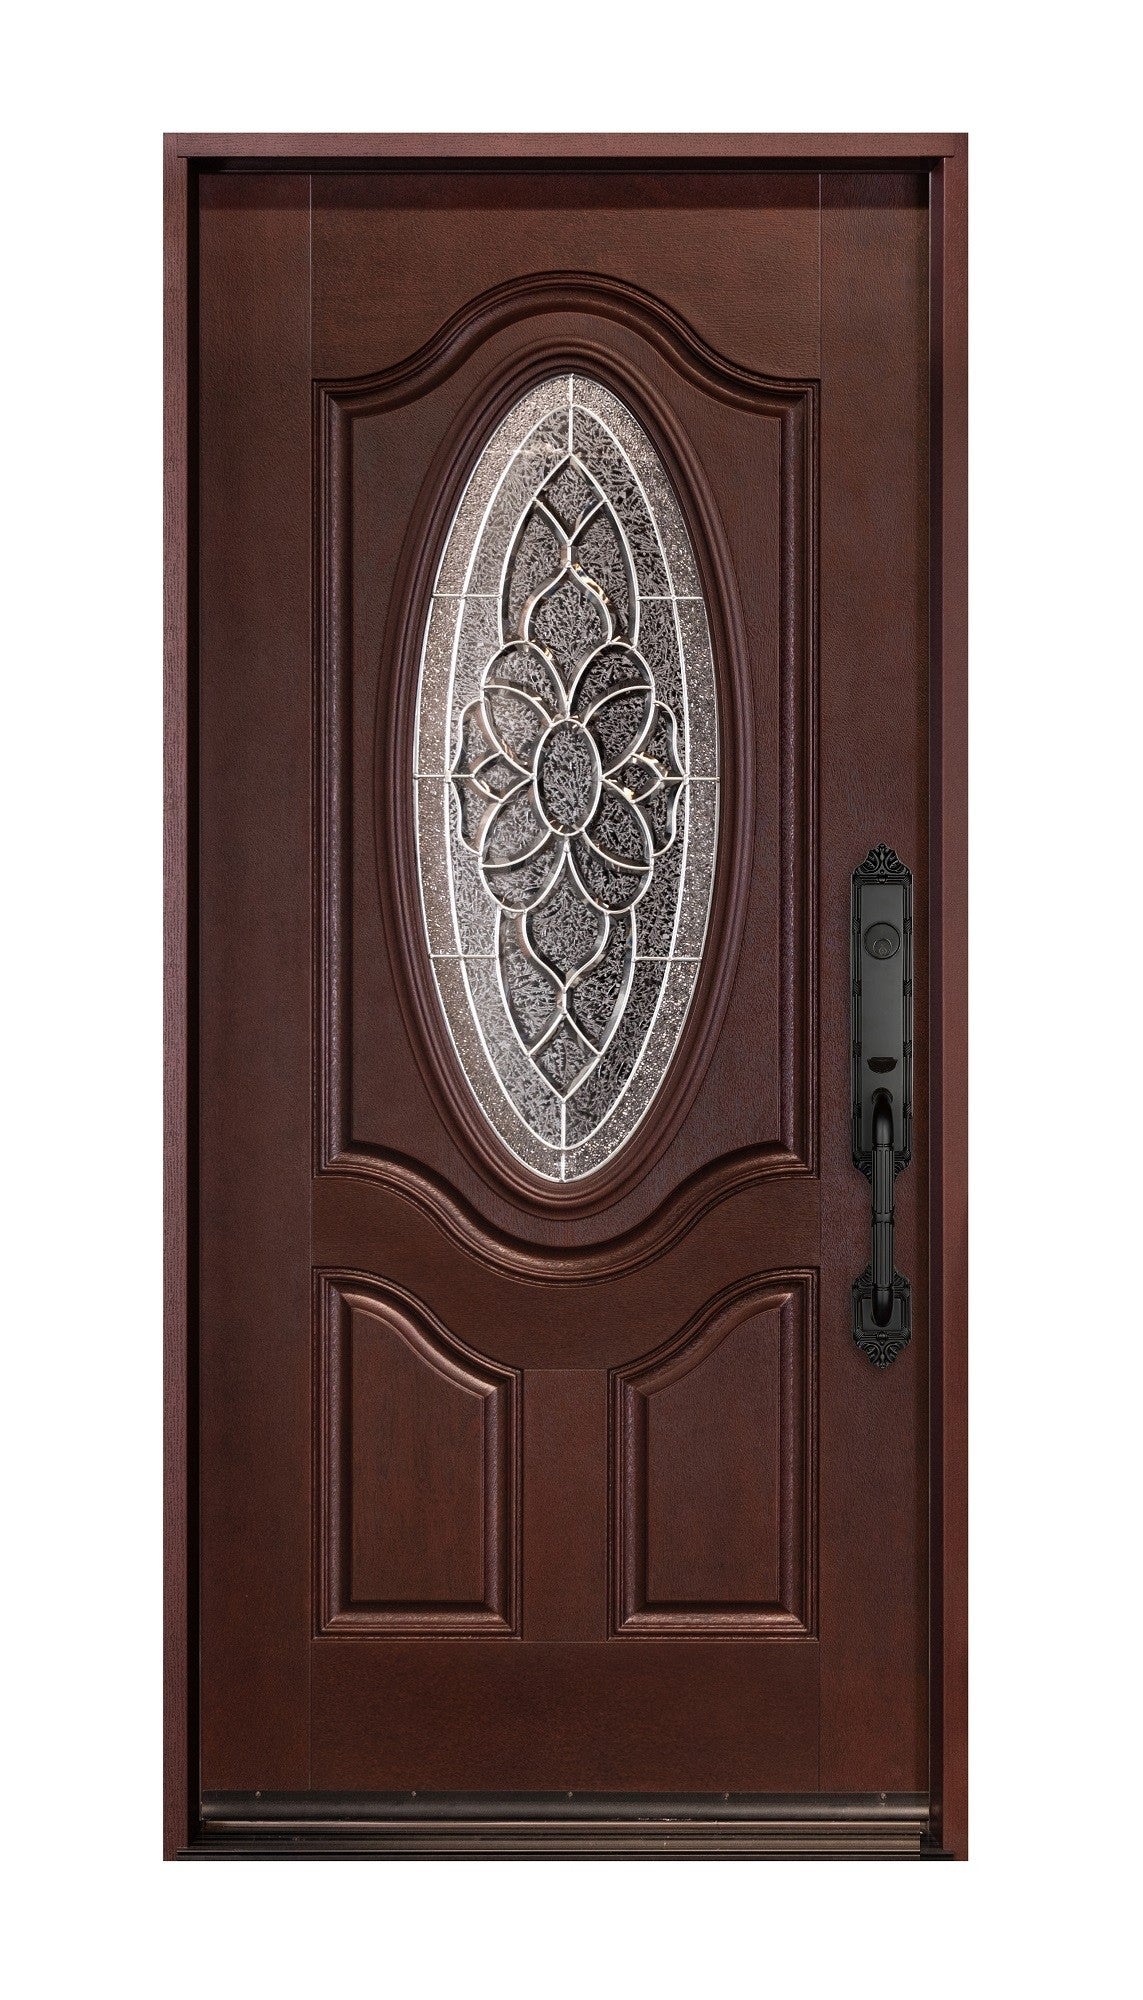 Entry Prehung Oval Glass Single Wood Door with 2 Sidelights